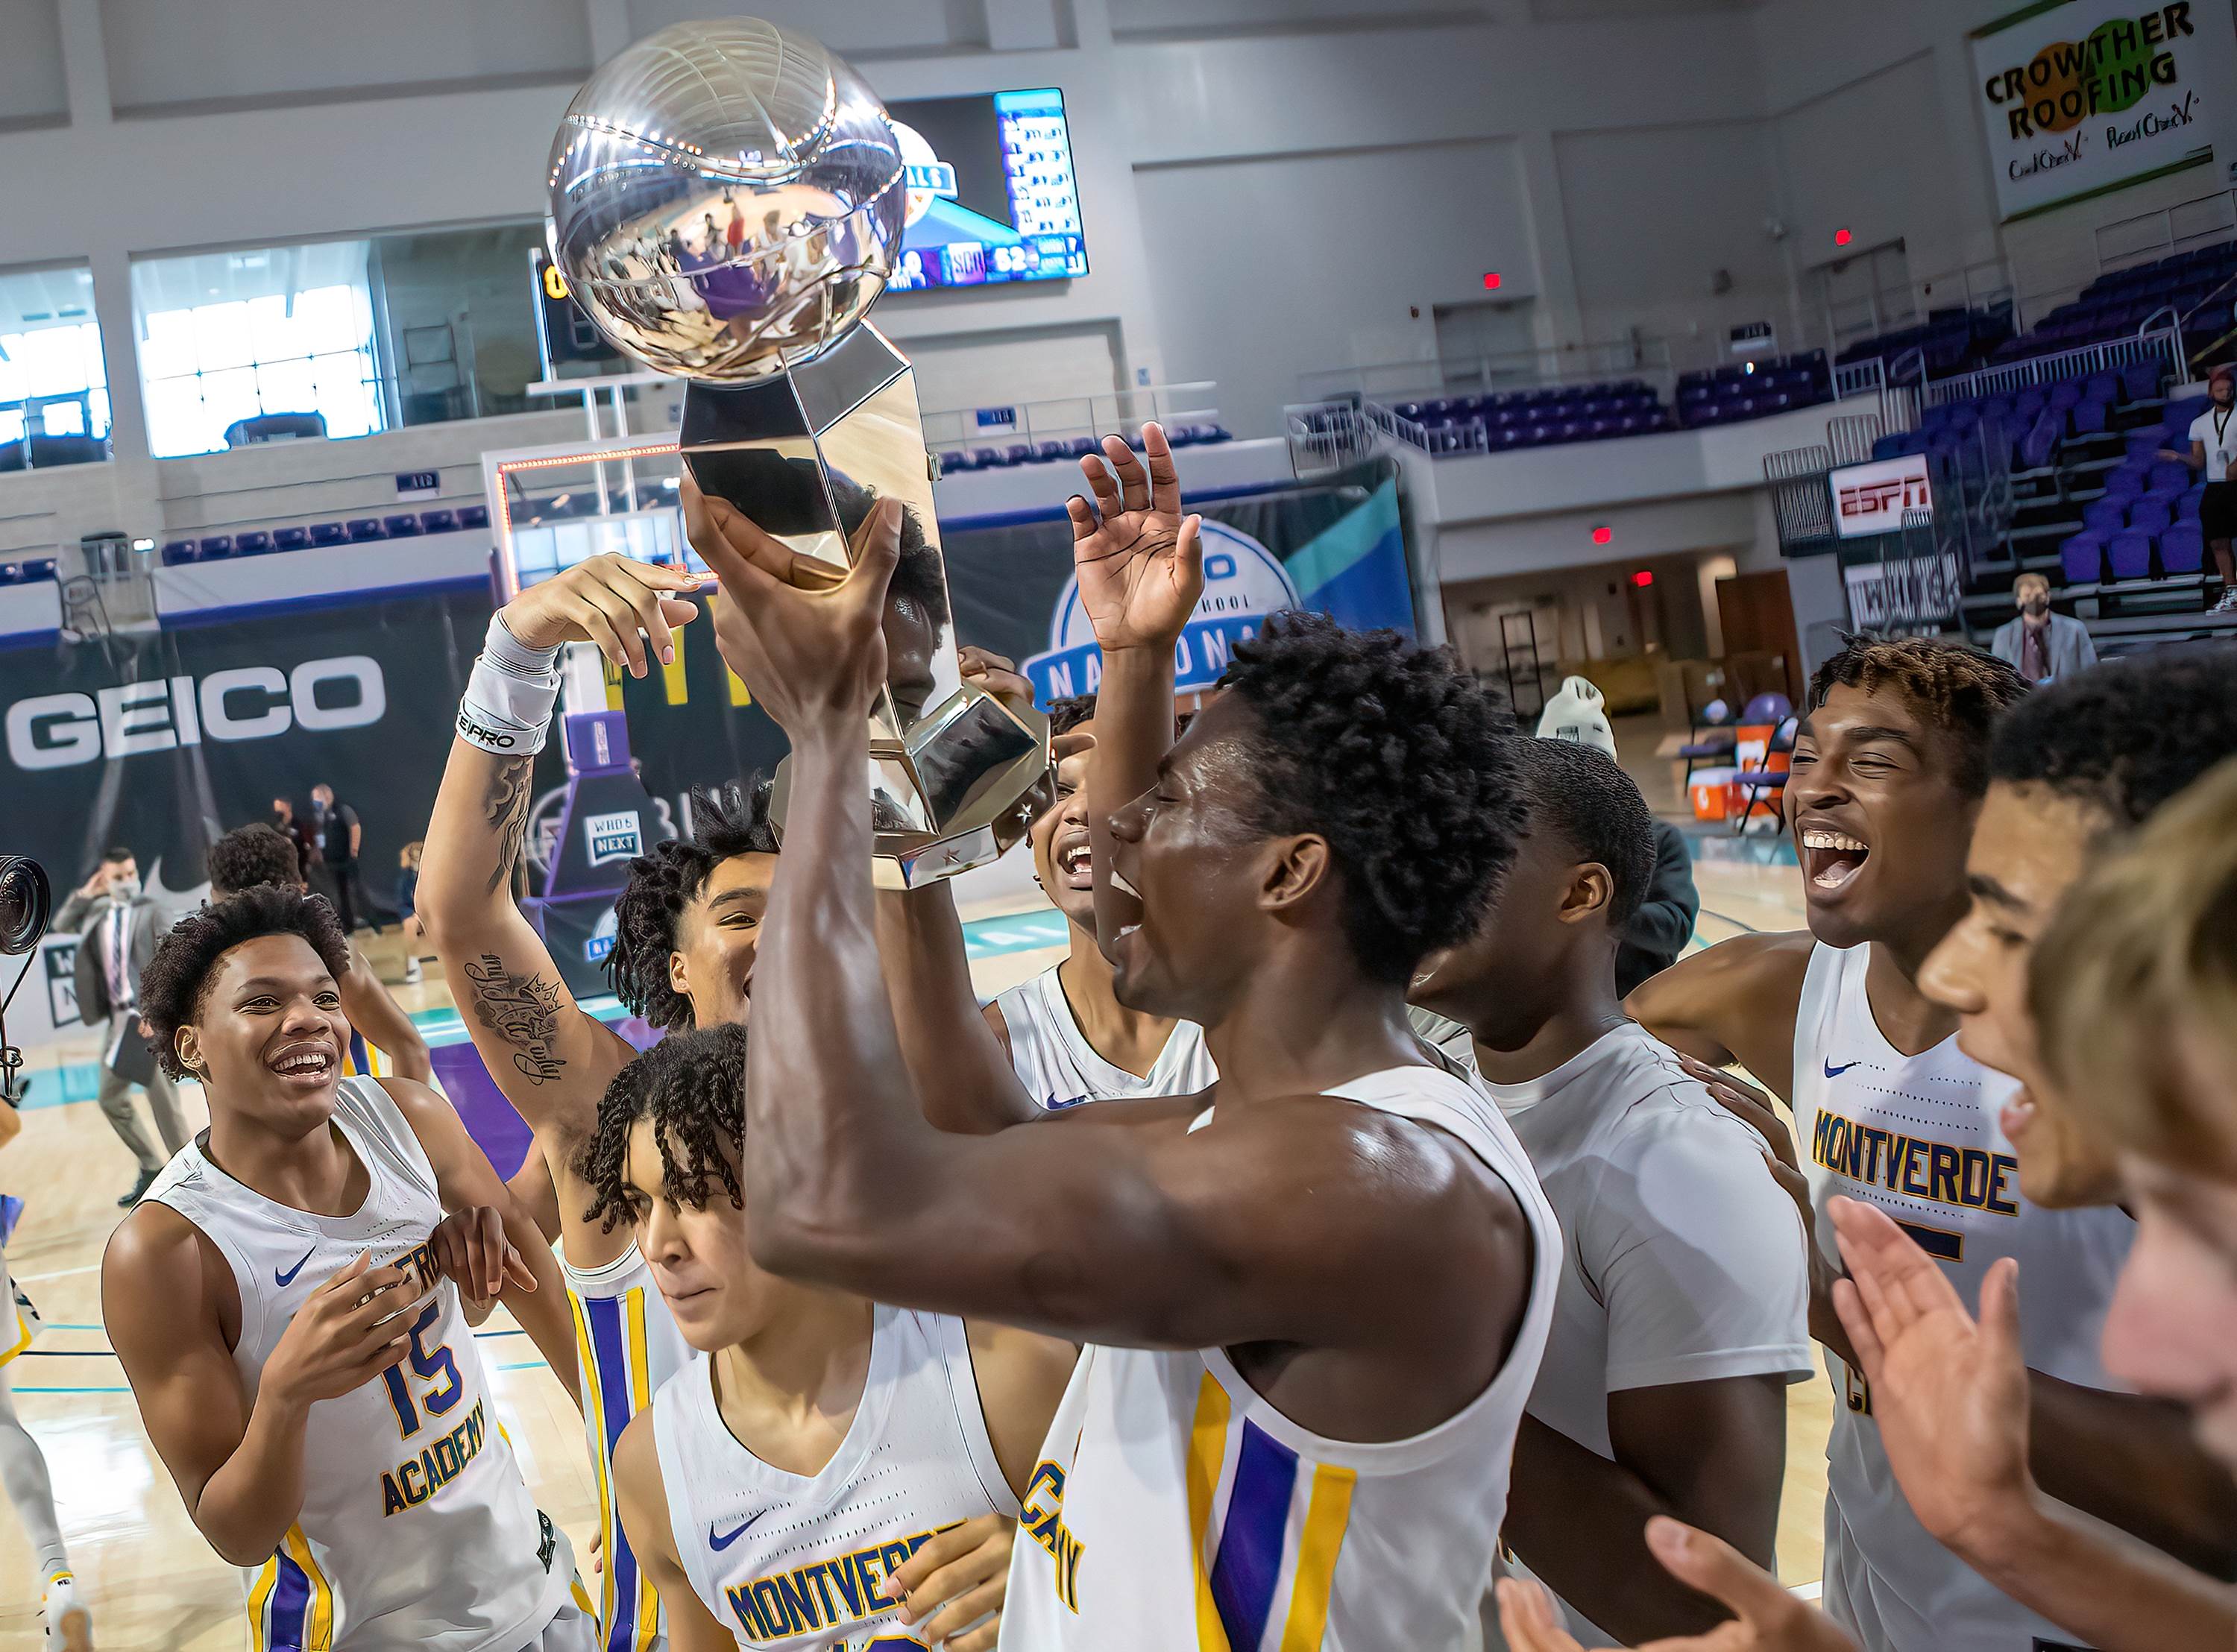 Montverde Academy looks to start the 2021-22 season where it ended the recently finished year - at No. 1 in the MaxPreps Top 25 high school basketball rankings.